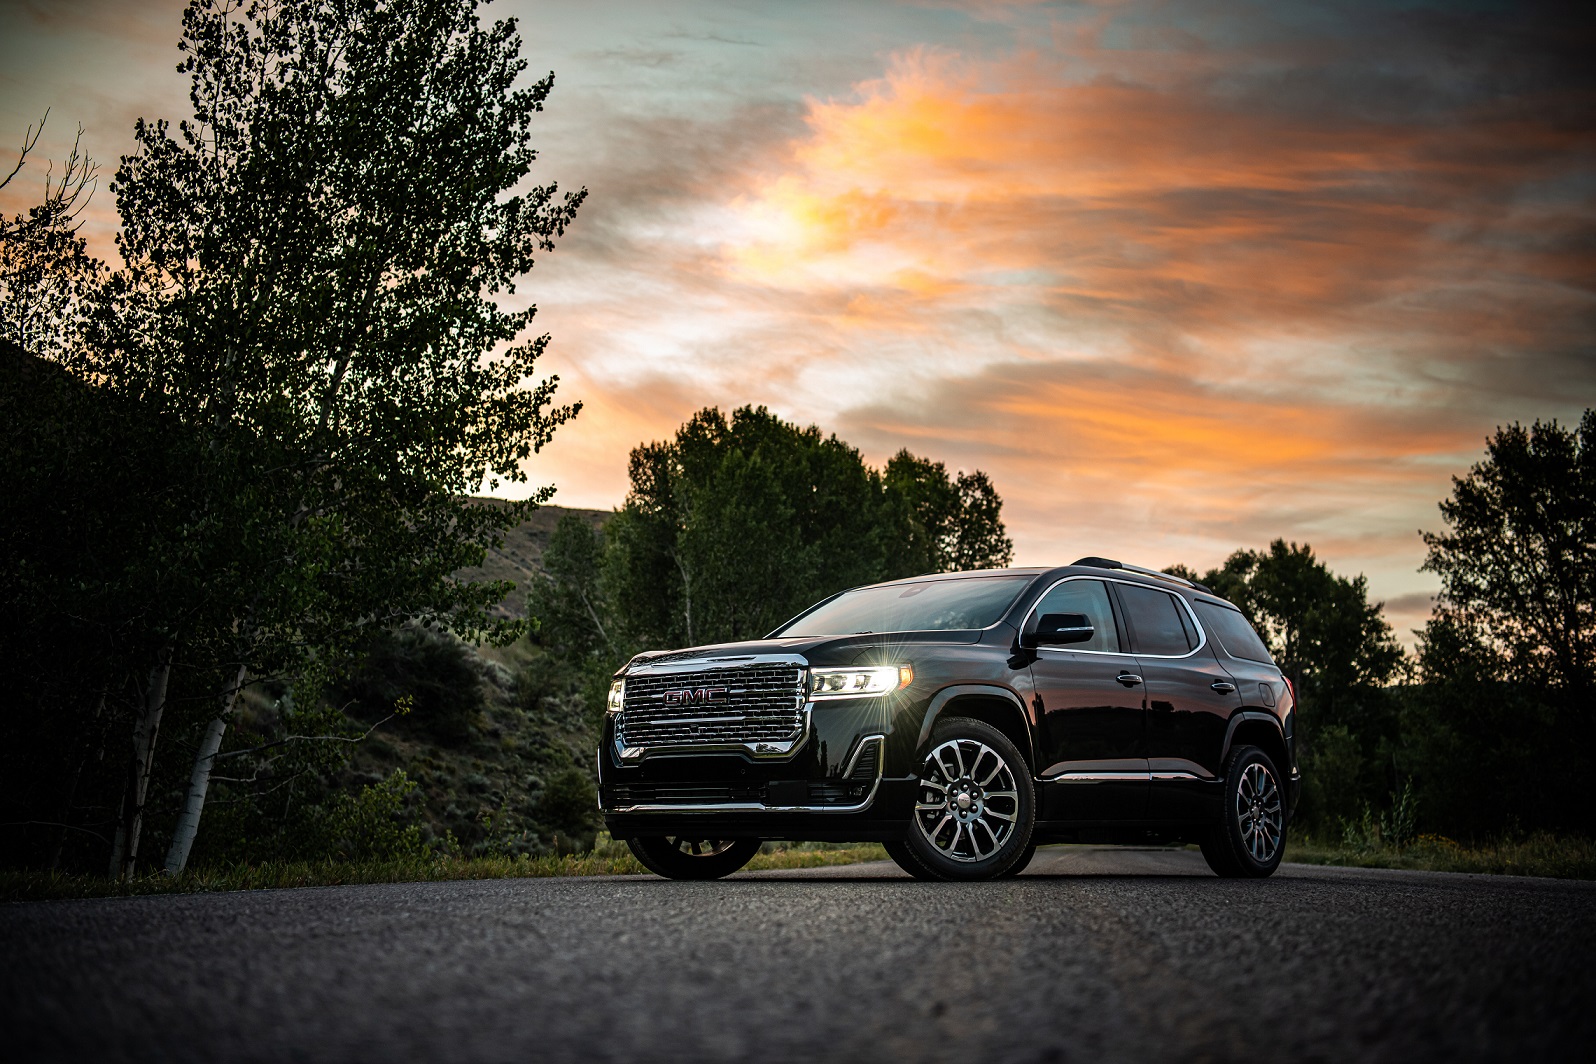 5 Reasons Why the Newly Redesigned 2020 Acadia Midsize SUV Stands Out From Its Competitors